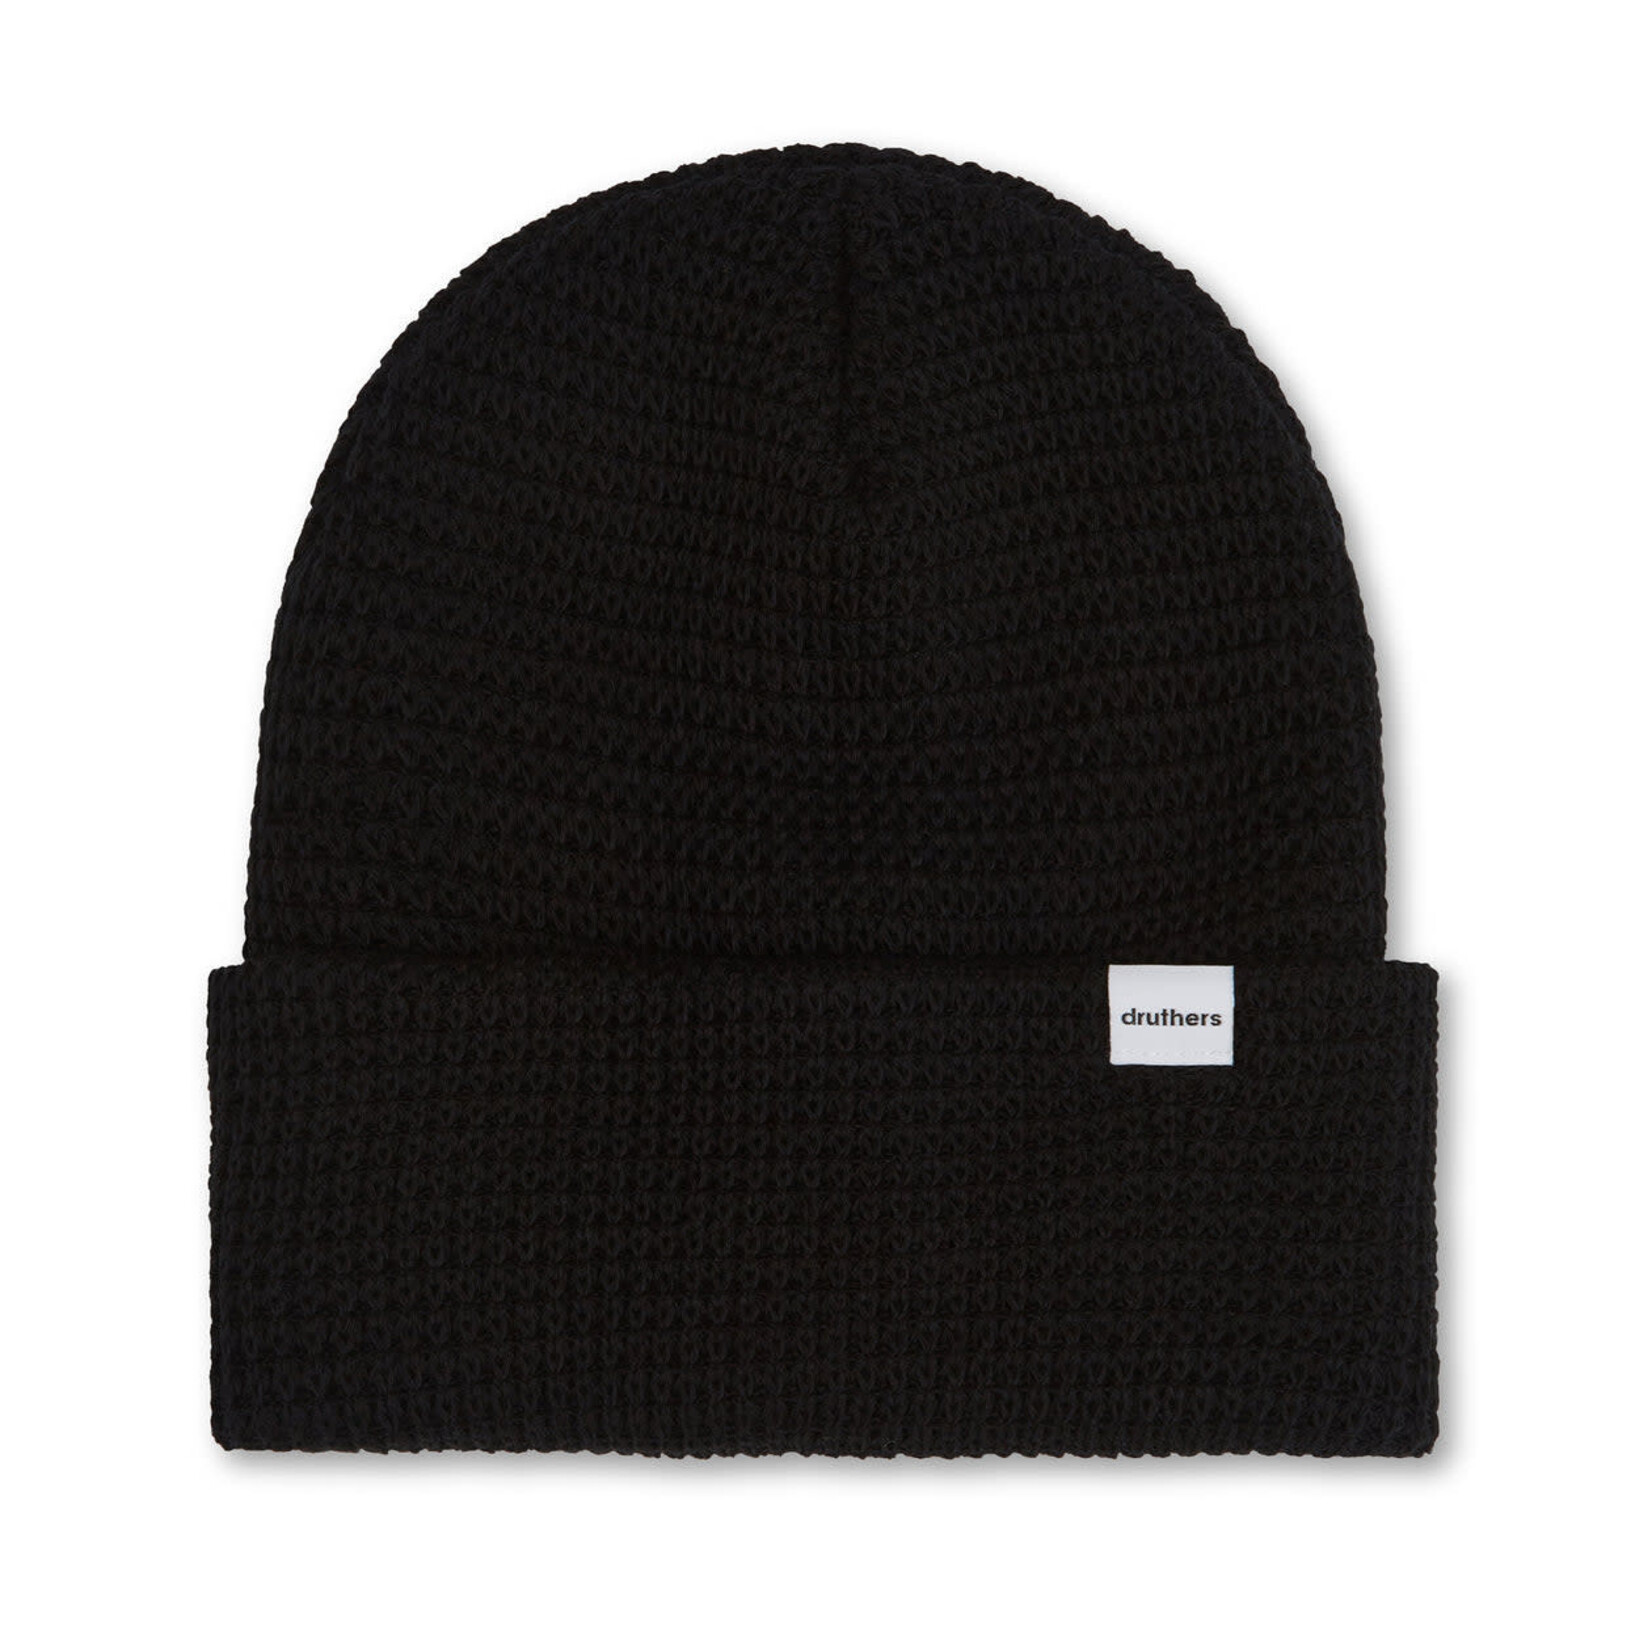 Druthers NYC Druthers Organic Cotton Waffle Knit Beanie Black